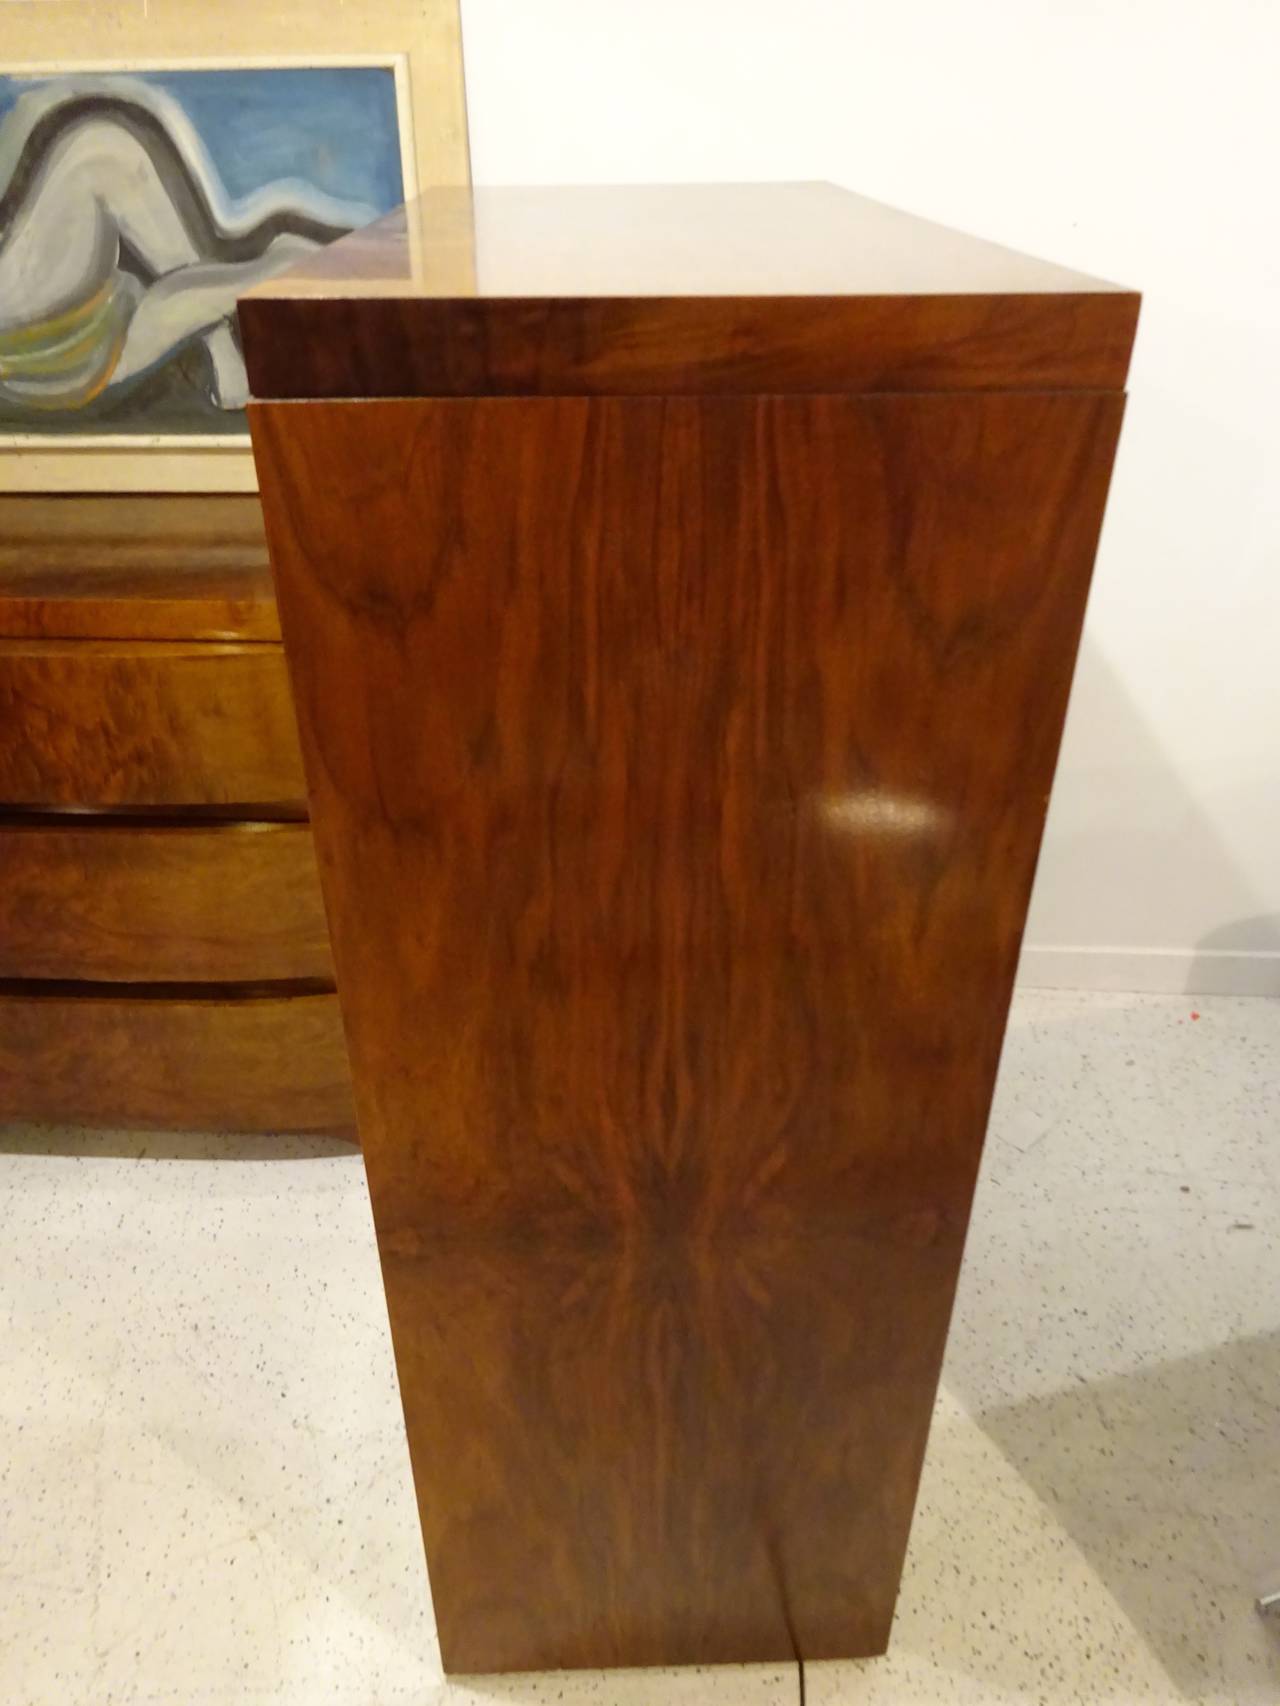 Art Deco Burl Walnut Tall Chest of Drawers, Of rectangular form with five concealed long drawers, beautiful original condition